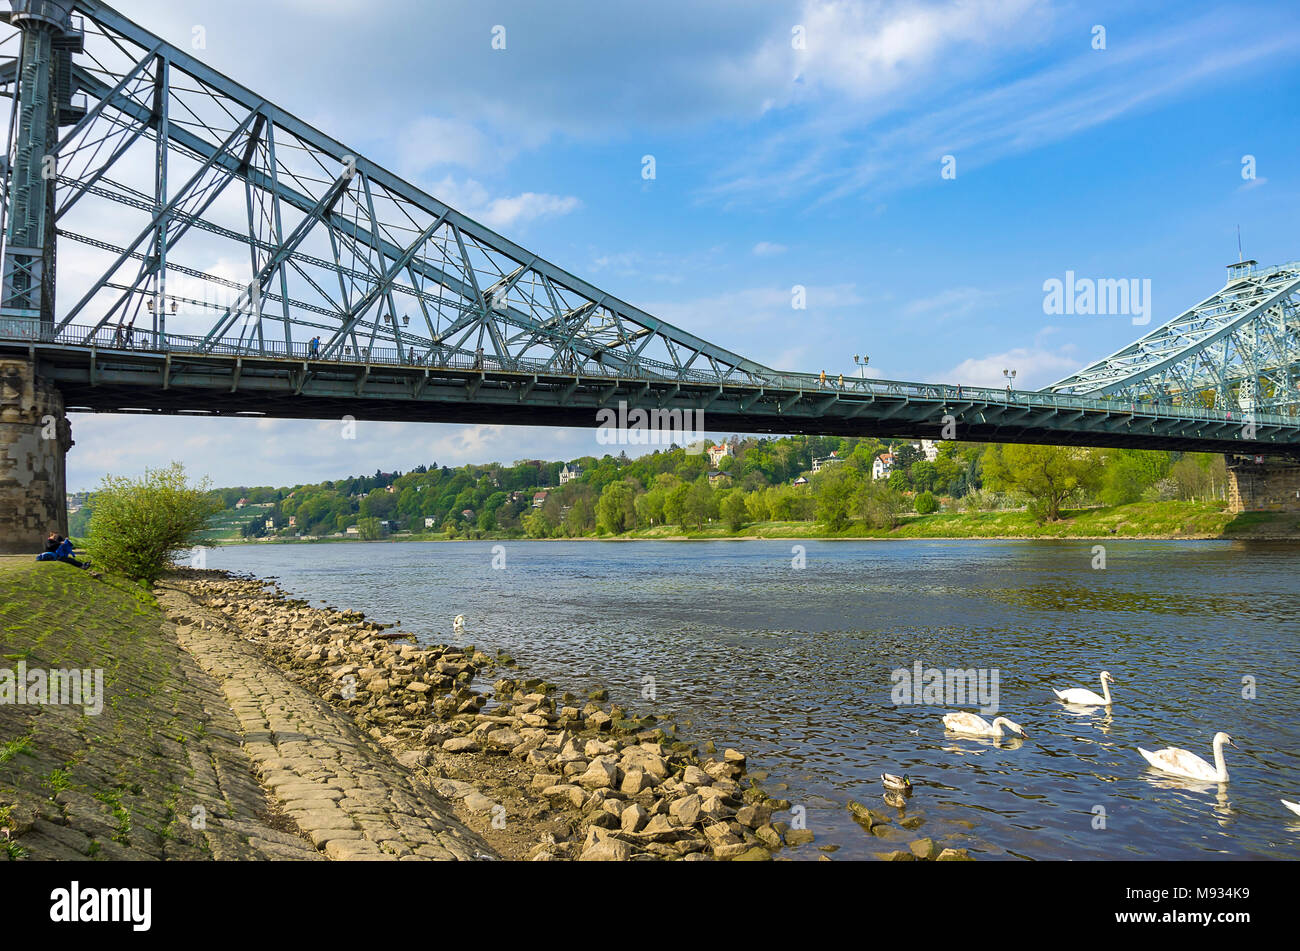 The Blue Wonder Bridge seen from the district of Blasewitz and with white swans that frolic on the Elbe River, Dresden, Saxony, Germany. Stock Photo